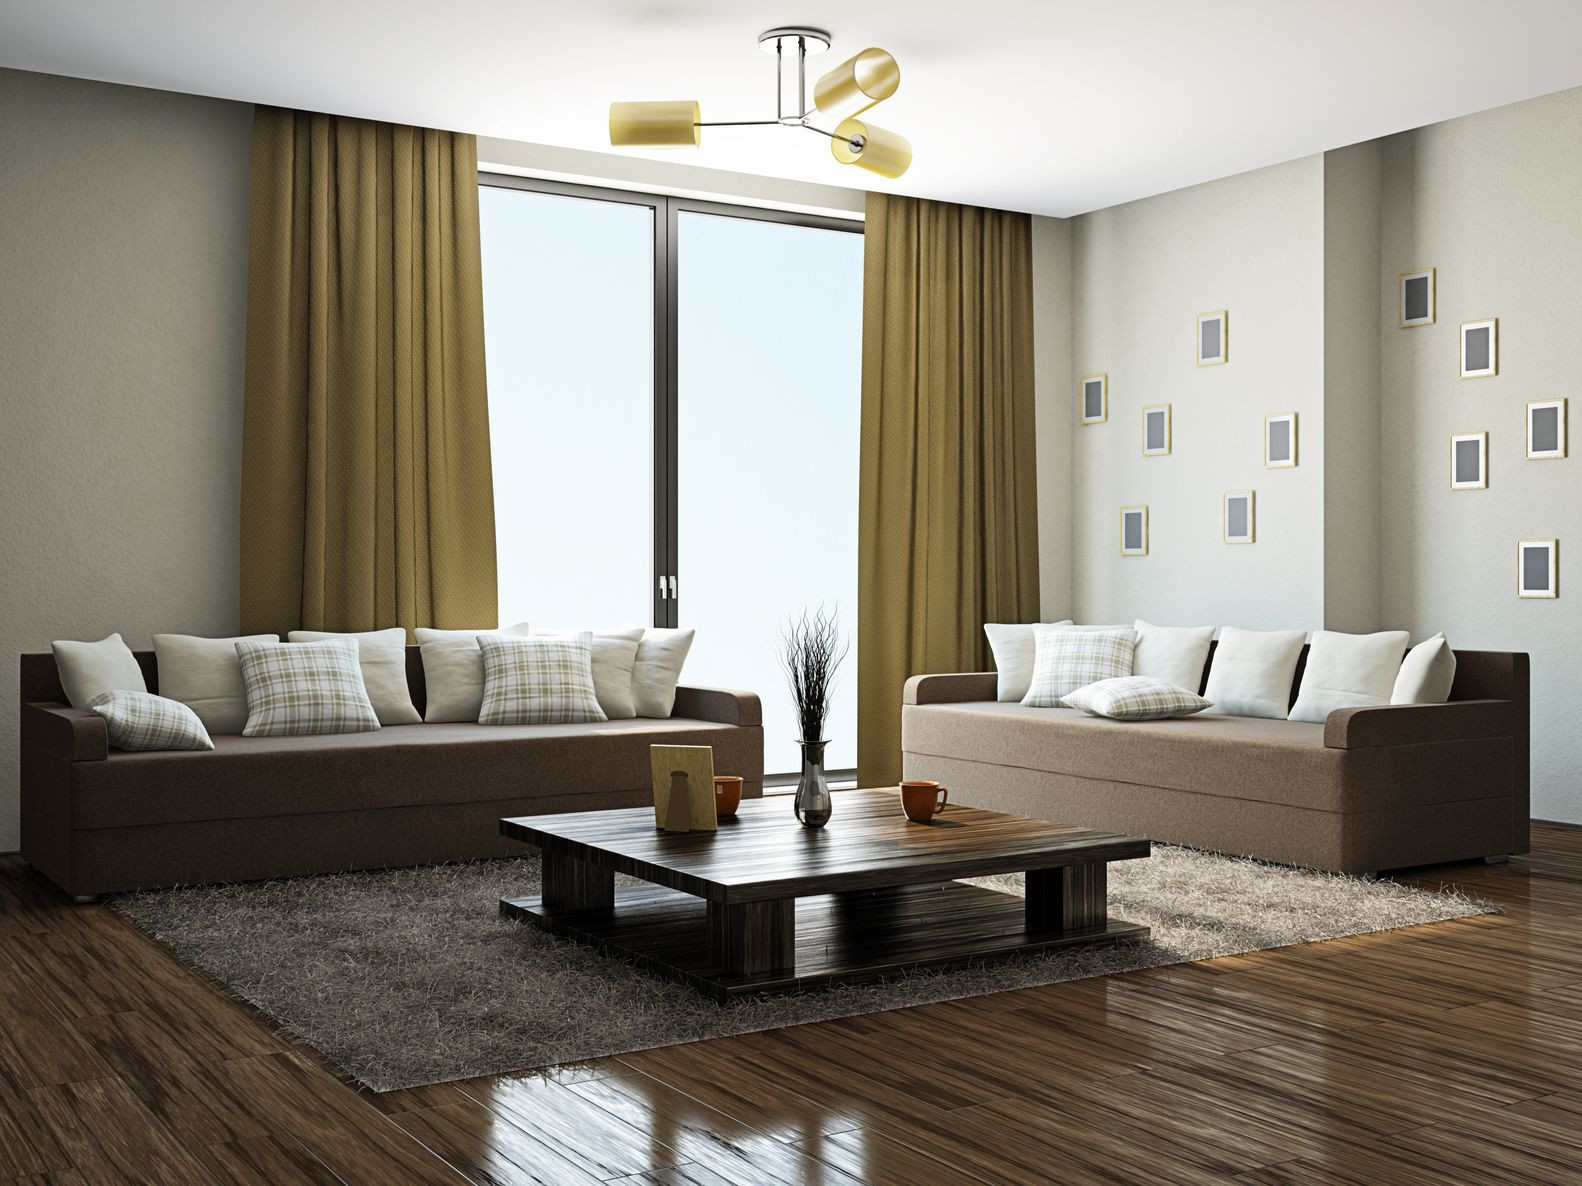 Contemporary Curtains For Living Room
 Awesome Living Room Curtains Designs Amaza Design